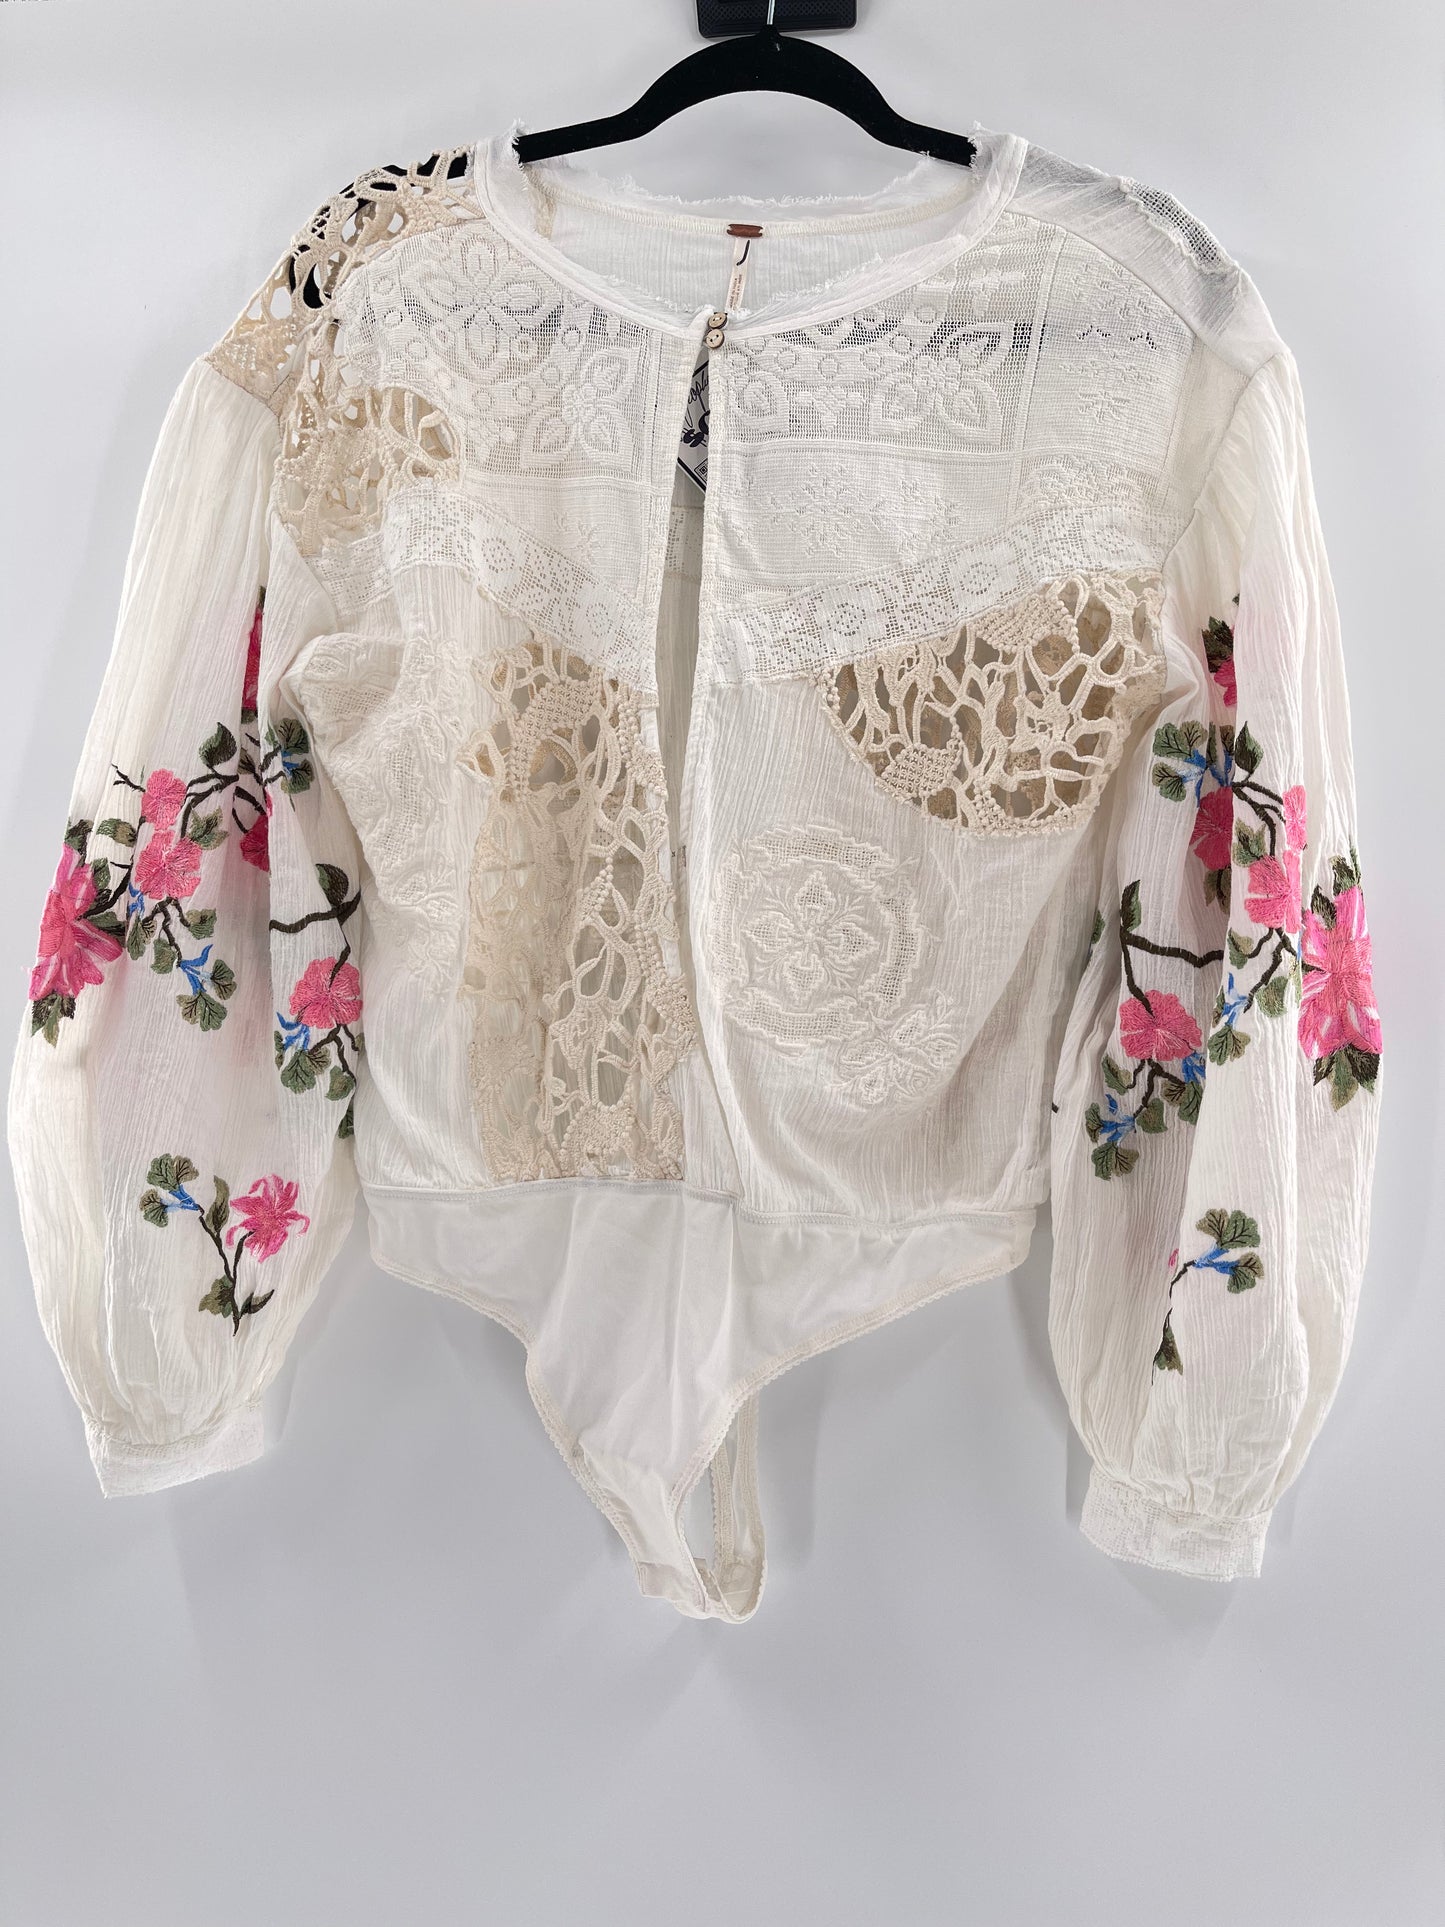 Free People Making Harmony Lace Cotton Embroidered Blouse (Medium)